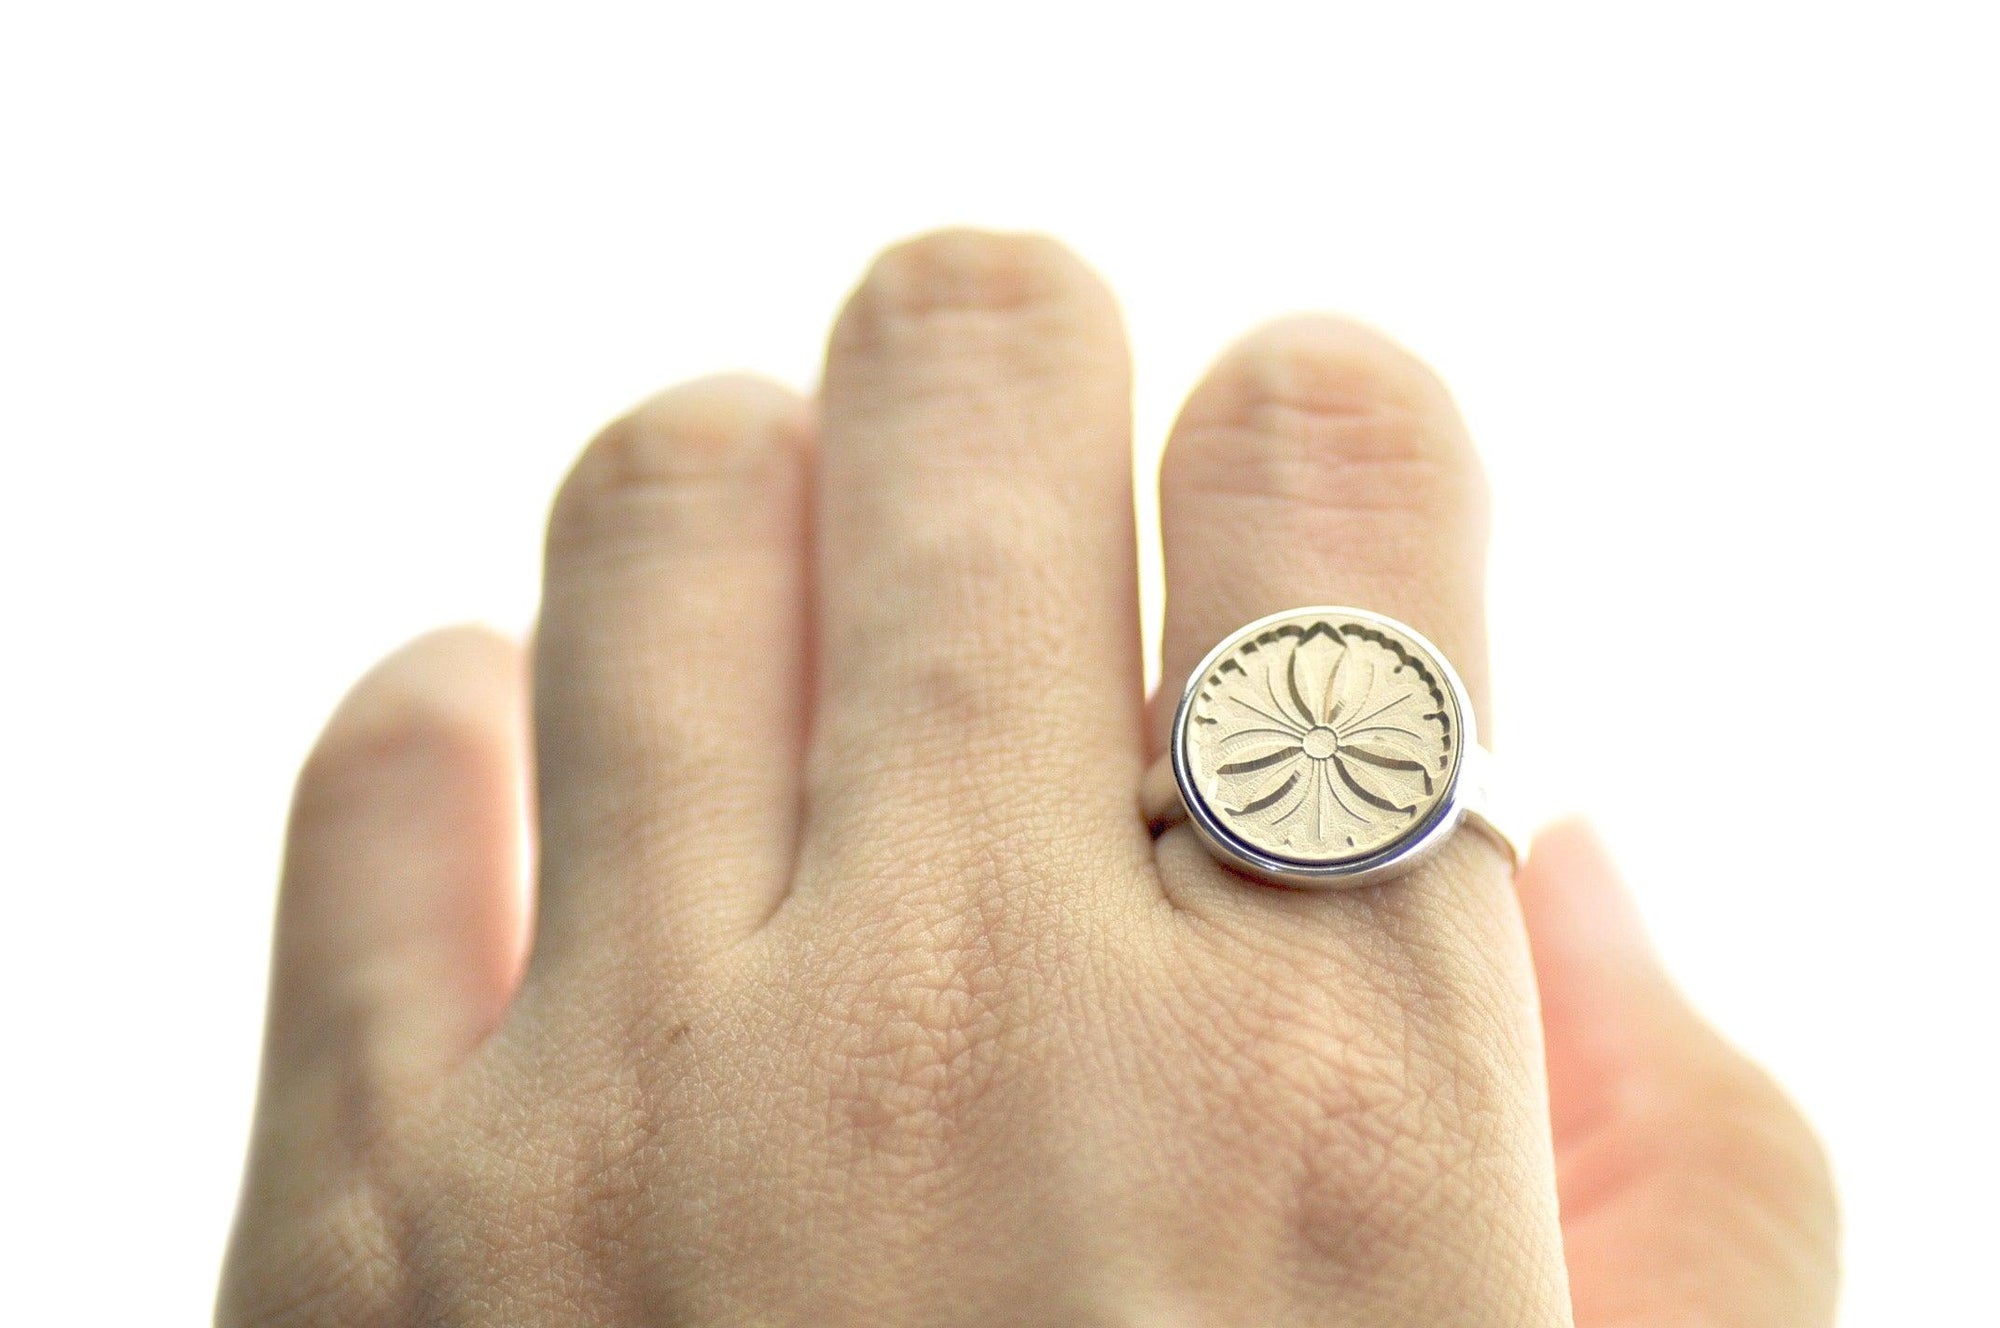 Japanese Kamon Icho Ginkgo Signet Ring - Backtozero B20 - 14m, 14mm, 14mm ring, 14mn, accessory, Botanical, ginkgo, her, Japanese, japanese family crest, jewelry, Kamon, Leaf, Leafs, Leaves, minimal, Nature, Plant, ring, signet ring, simple, size 10, size 7, size 8, size 9, wax seal, wax seal stamp